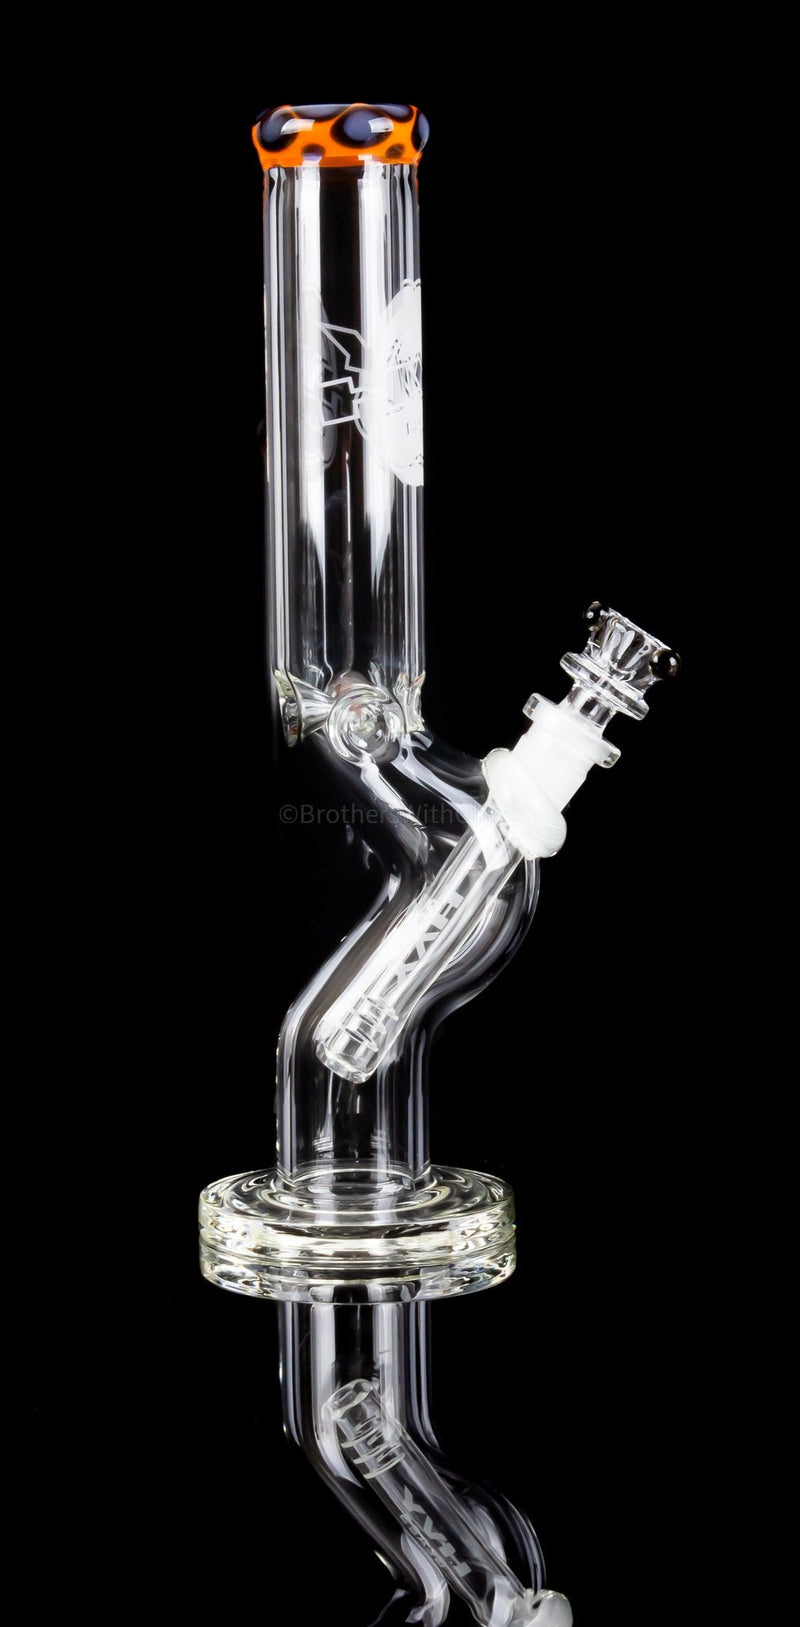 HVY Glass Heady Worked Color Dot Curve Bong - Color Variations.